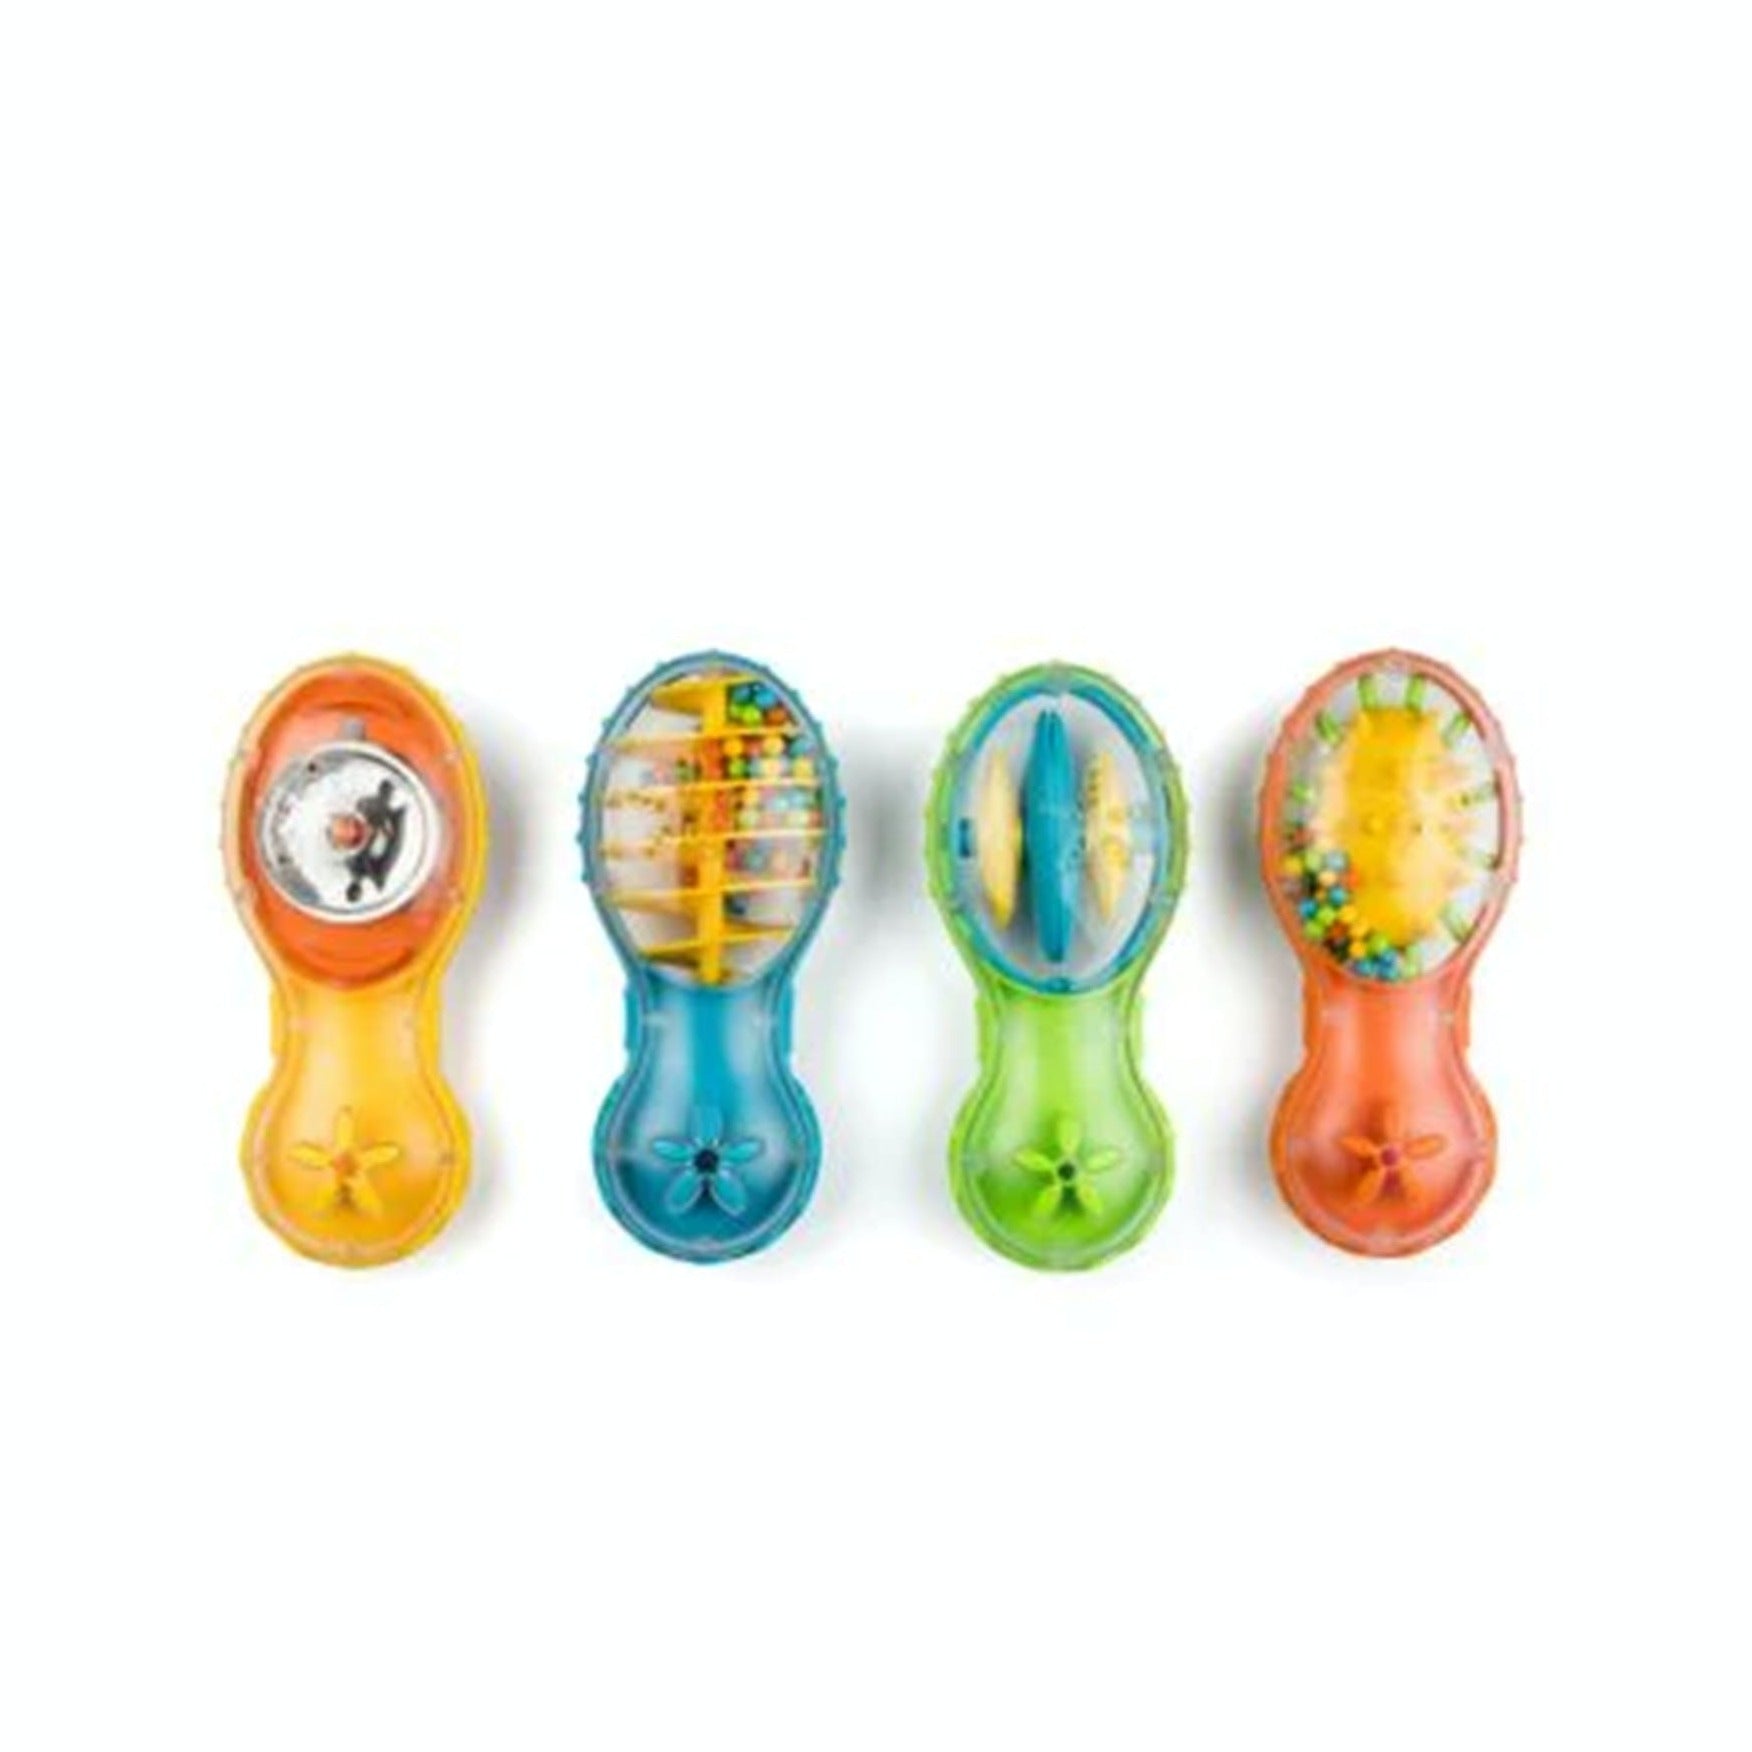 Halilit Young Maestro Gift Set, Delight baby’s senses with the Halilit Young Maestro Set. This Halilit Young Maestro Gift Set contains four vibrantly coloured shakers that each provide different sounds and visual treats for young babies to enjoy. With soft textured handles for an easy and comfortable grip and safely enclosed beads, bells and clip claps, these shakers are perfect for introducing young babies to the world of music making. You are invited to introduce your children to the magical world of musi